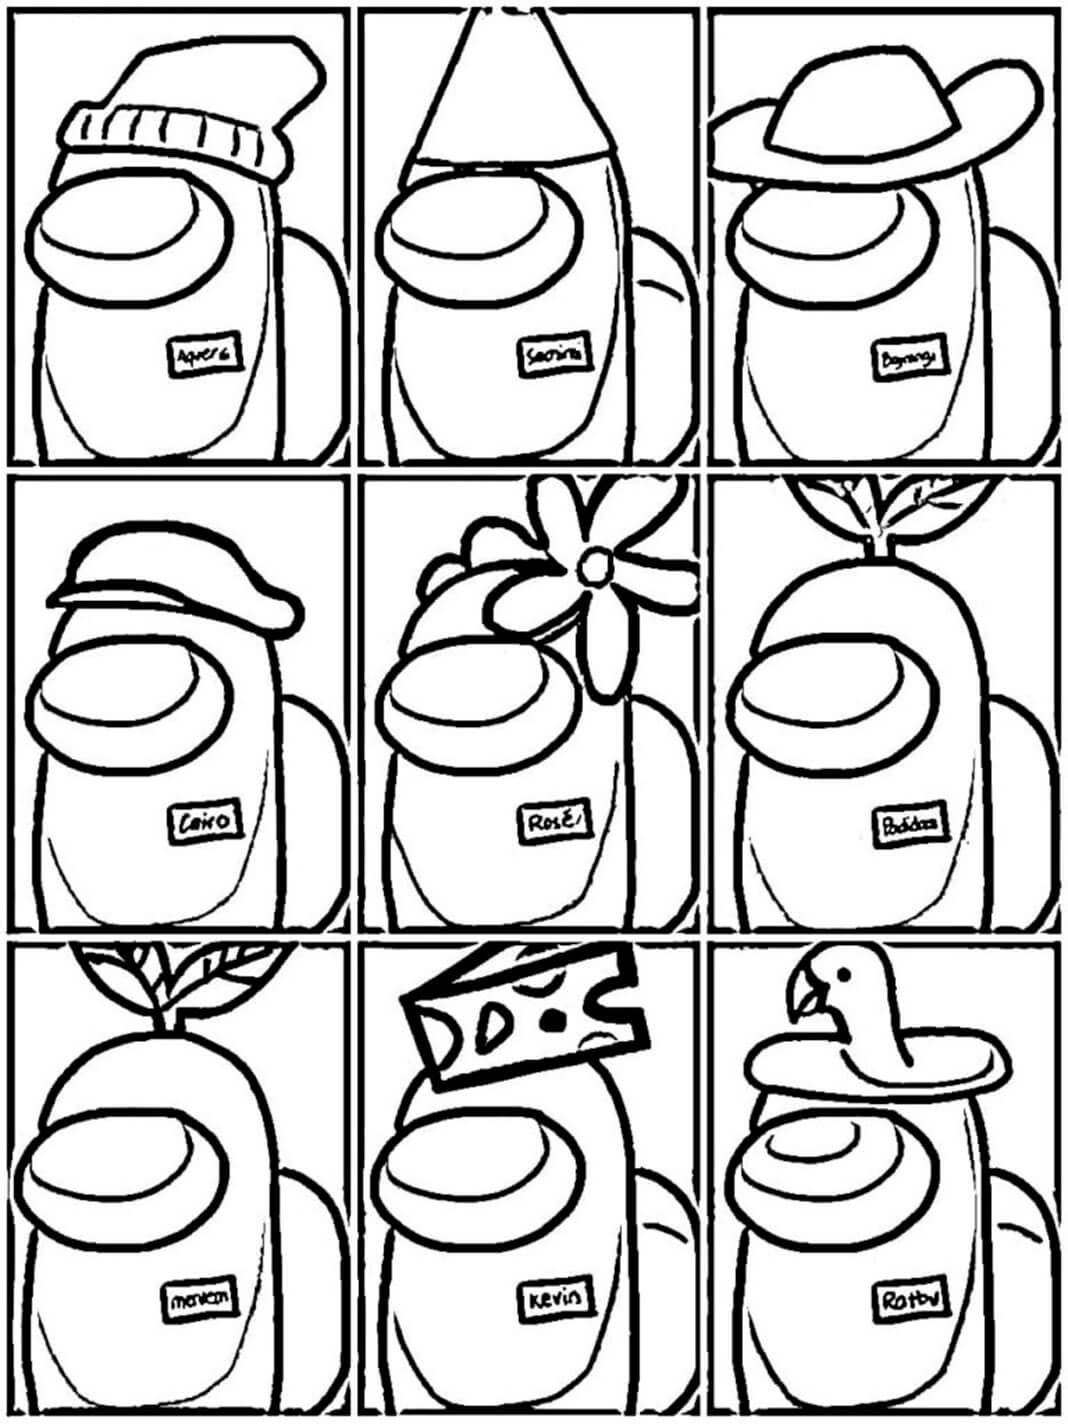 Among Us 8 Coloring Page Free Printable Coloring Pages for Kids